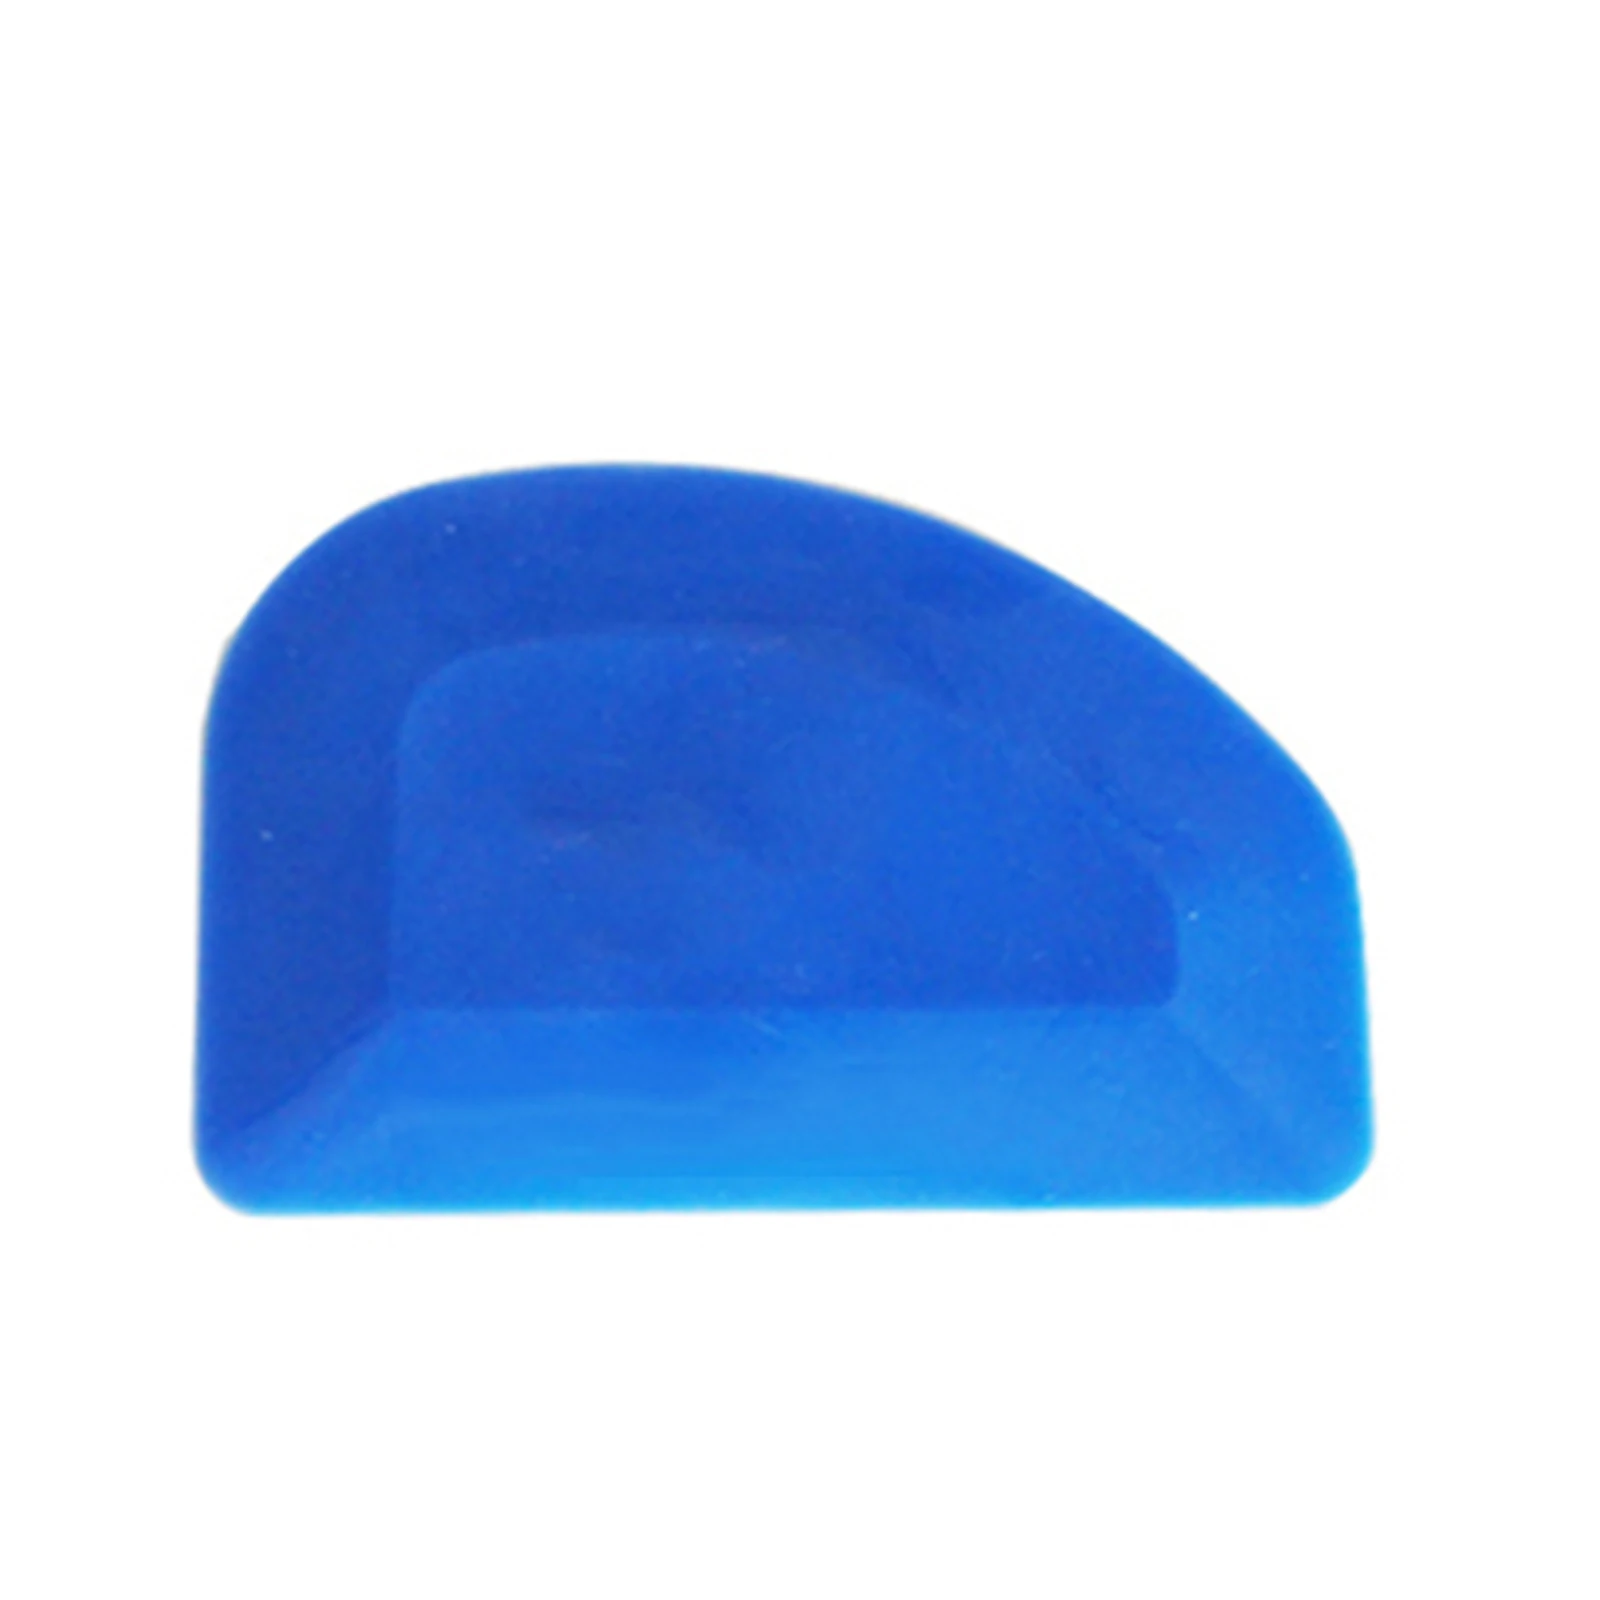 

Car Rubber Scraper Oval Advertising Film Spreader Squeegee Smoothing Car Painting Tool Rubber Putty Scraper Oval Painting Tool